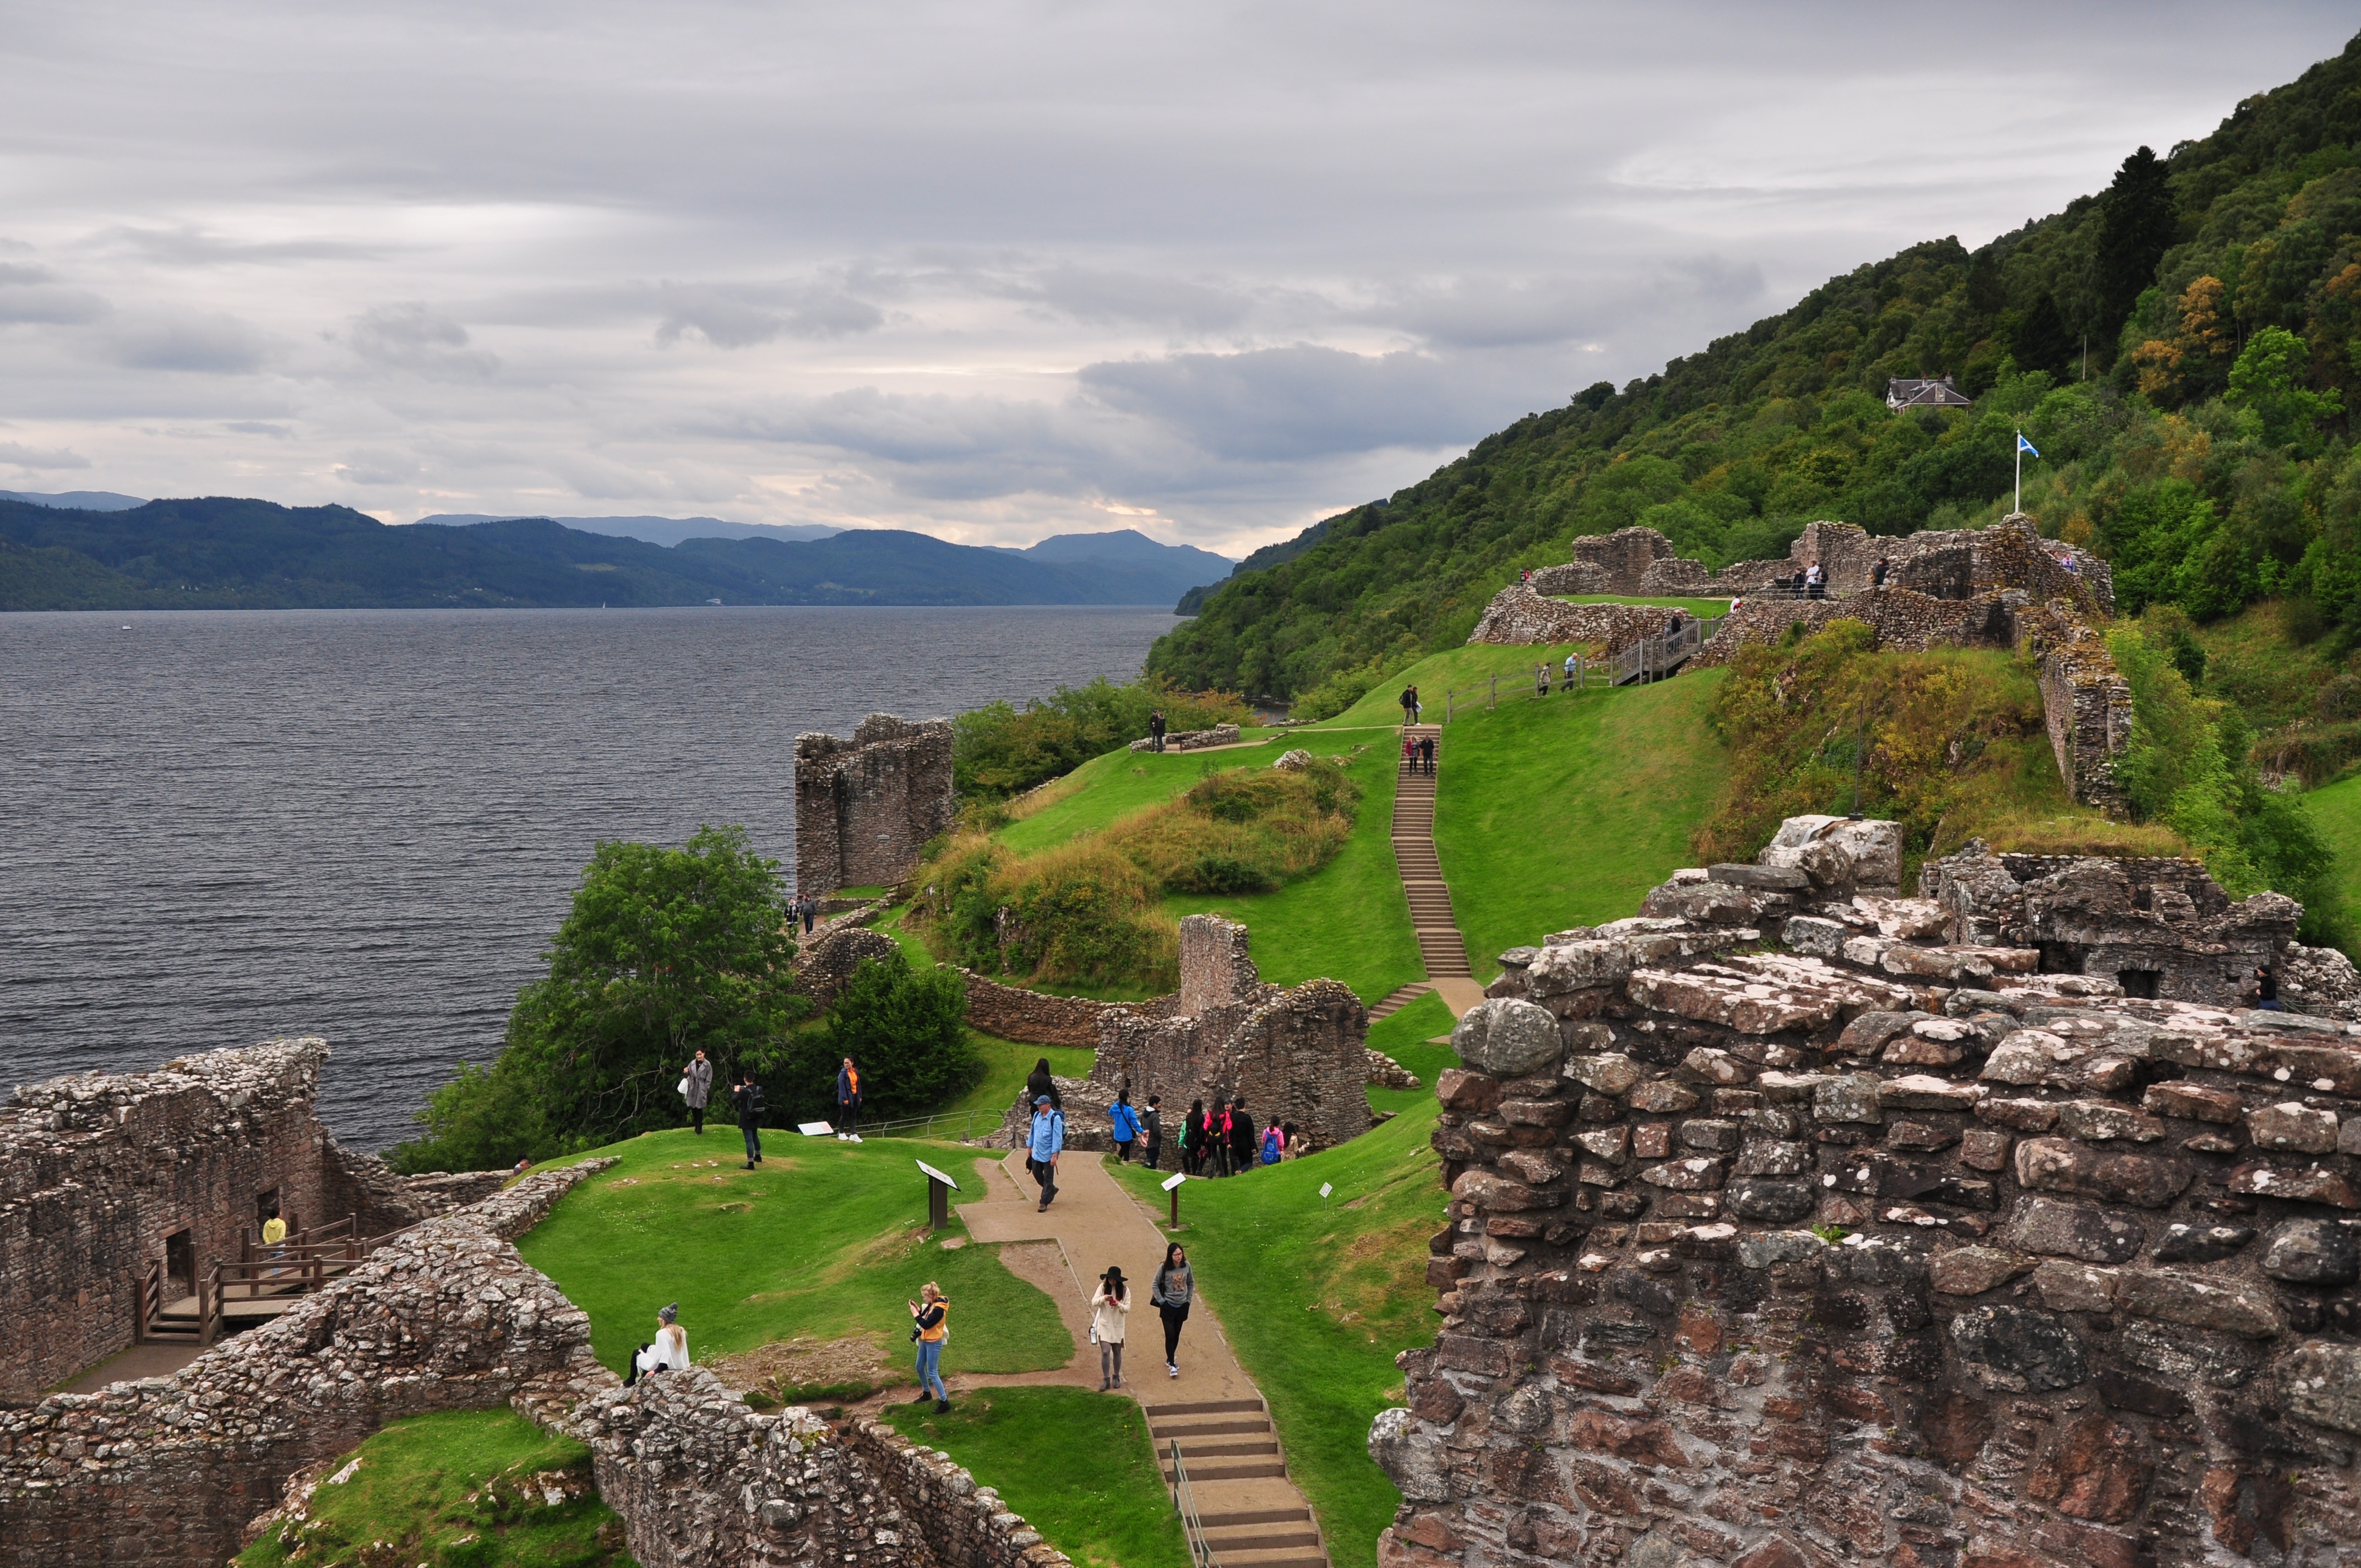 Clouds over Urquhart Castle and the Loch Ness.